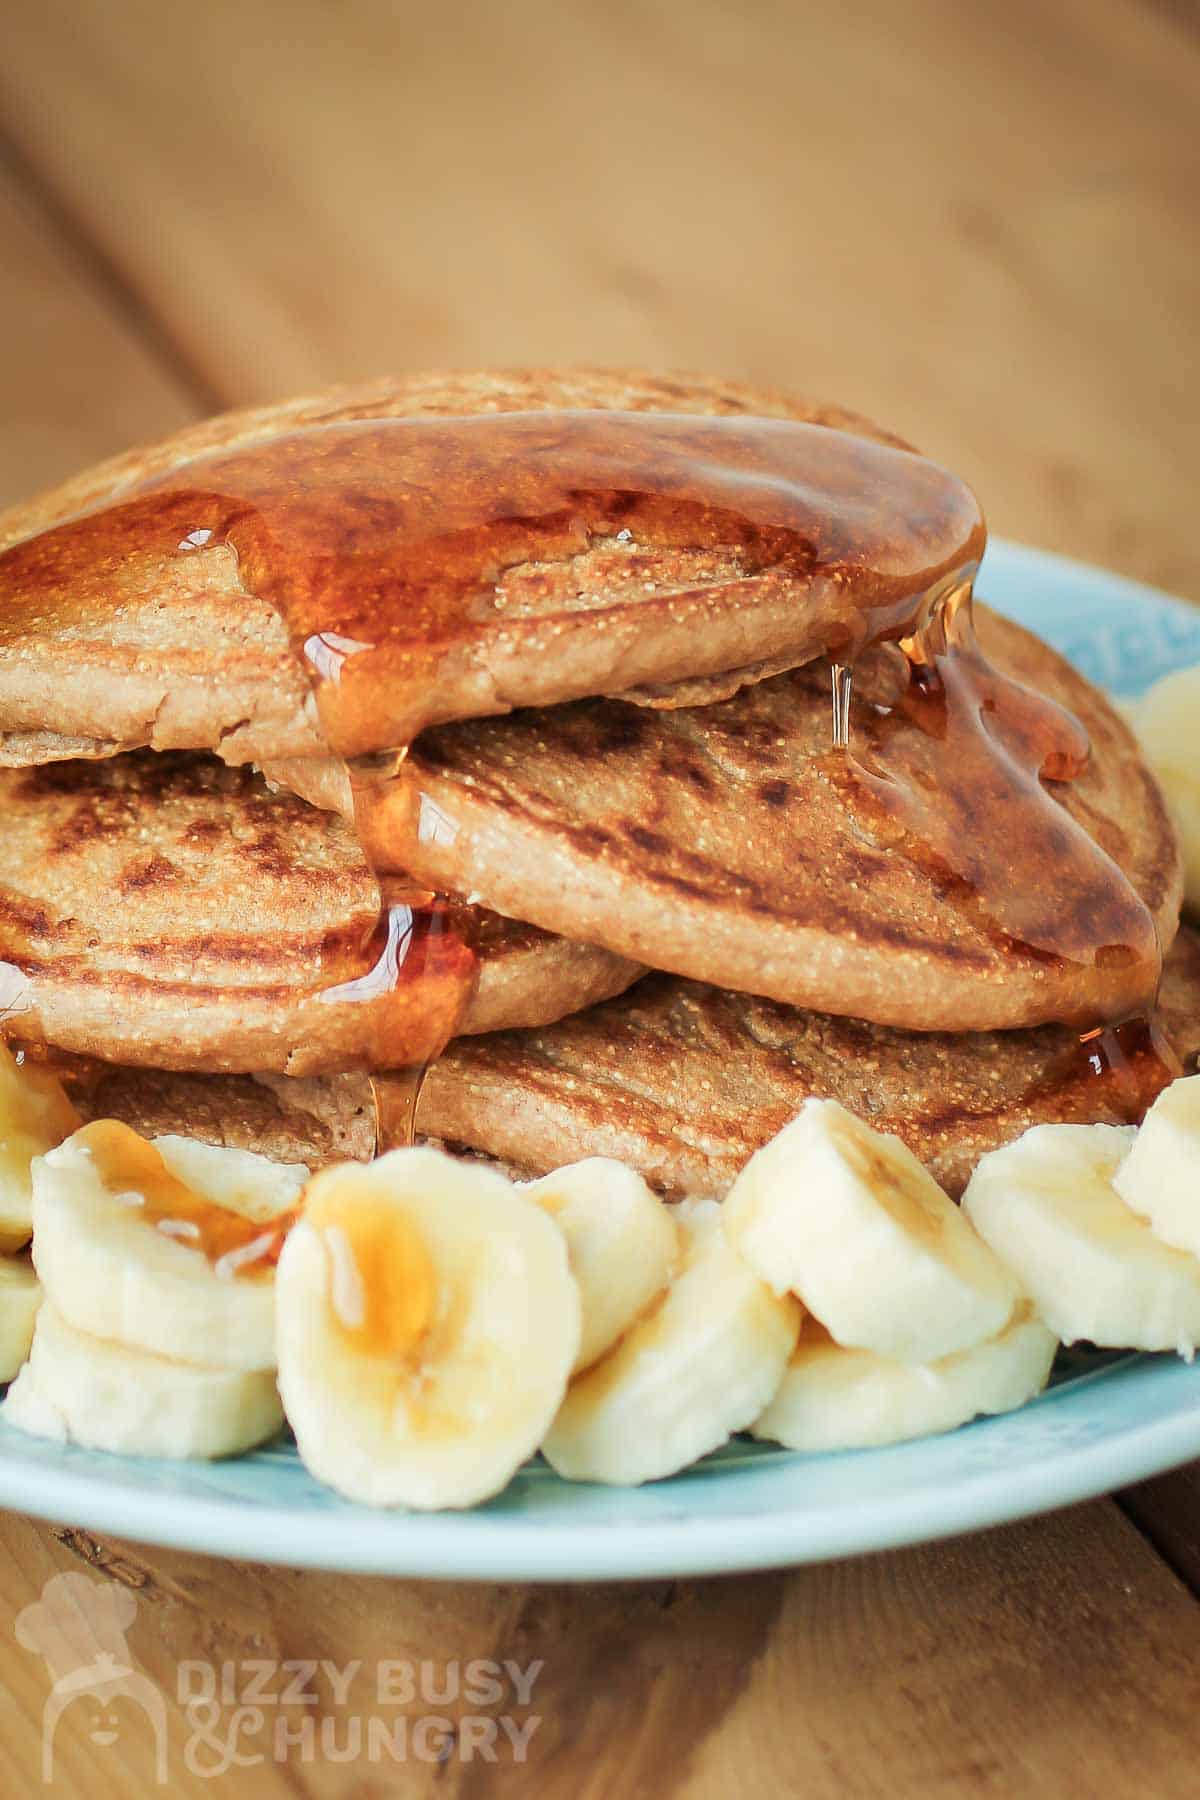 Close up side shot of multiple pancakes stacked on each other with syrup drizzled on them and bananas on the side all on a light blue plate.